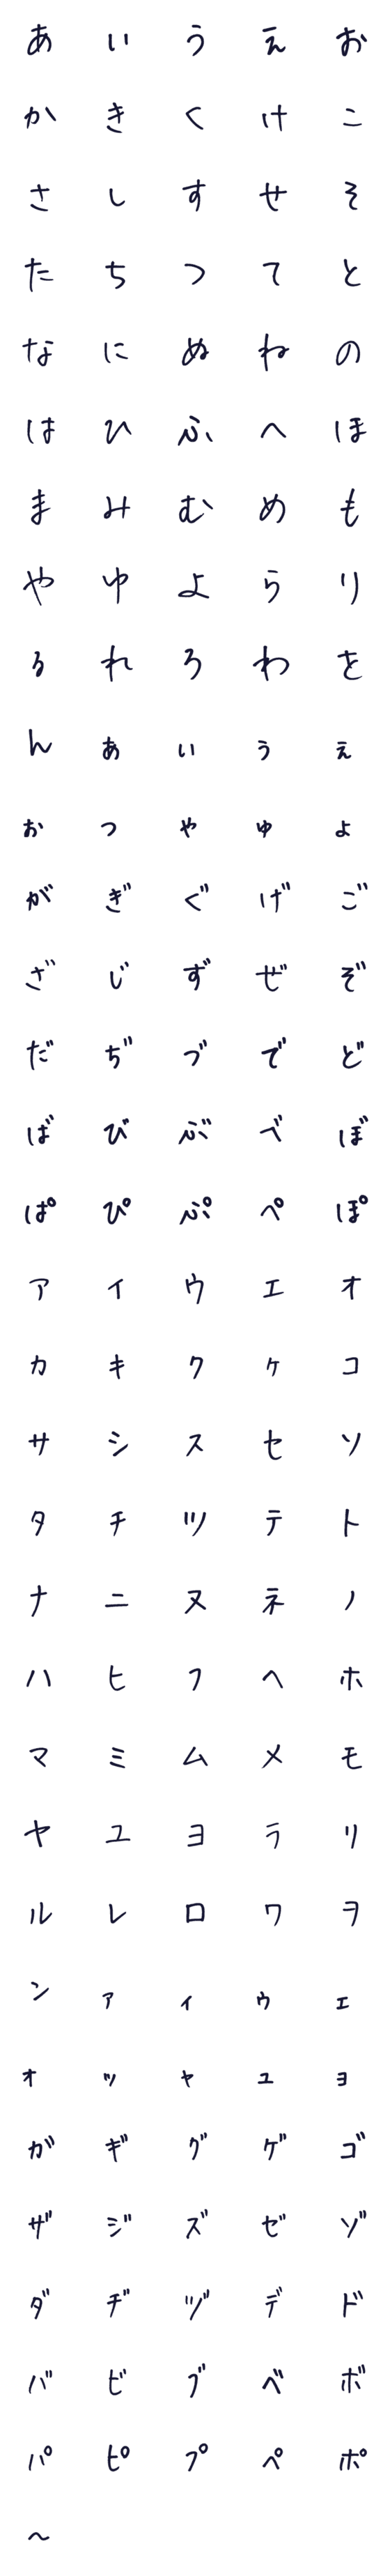 [LINE絵文字]20歳字の画像一覧